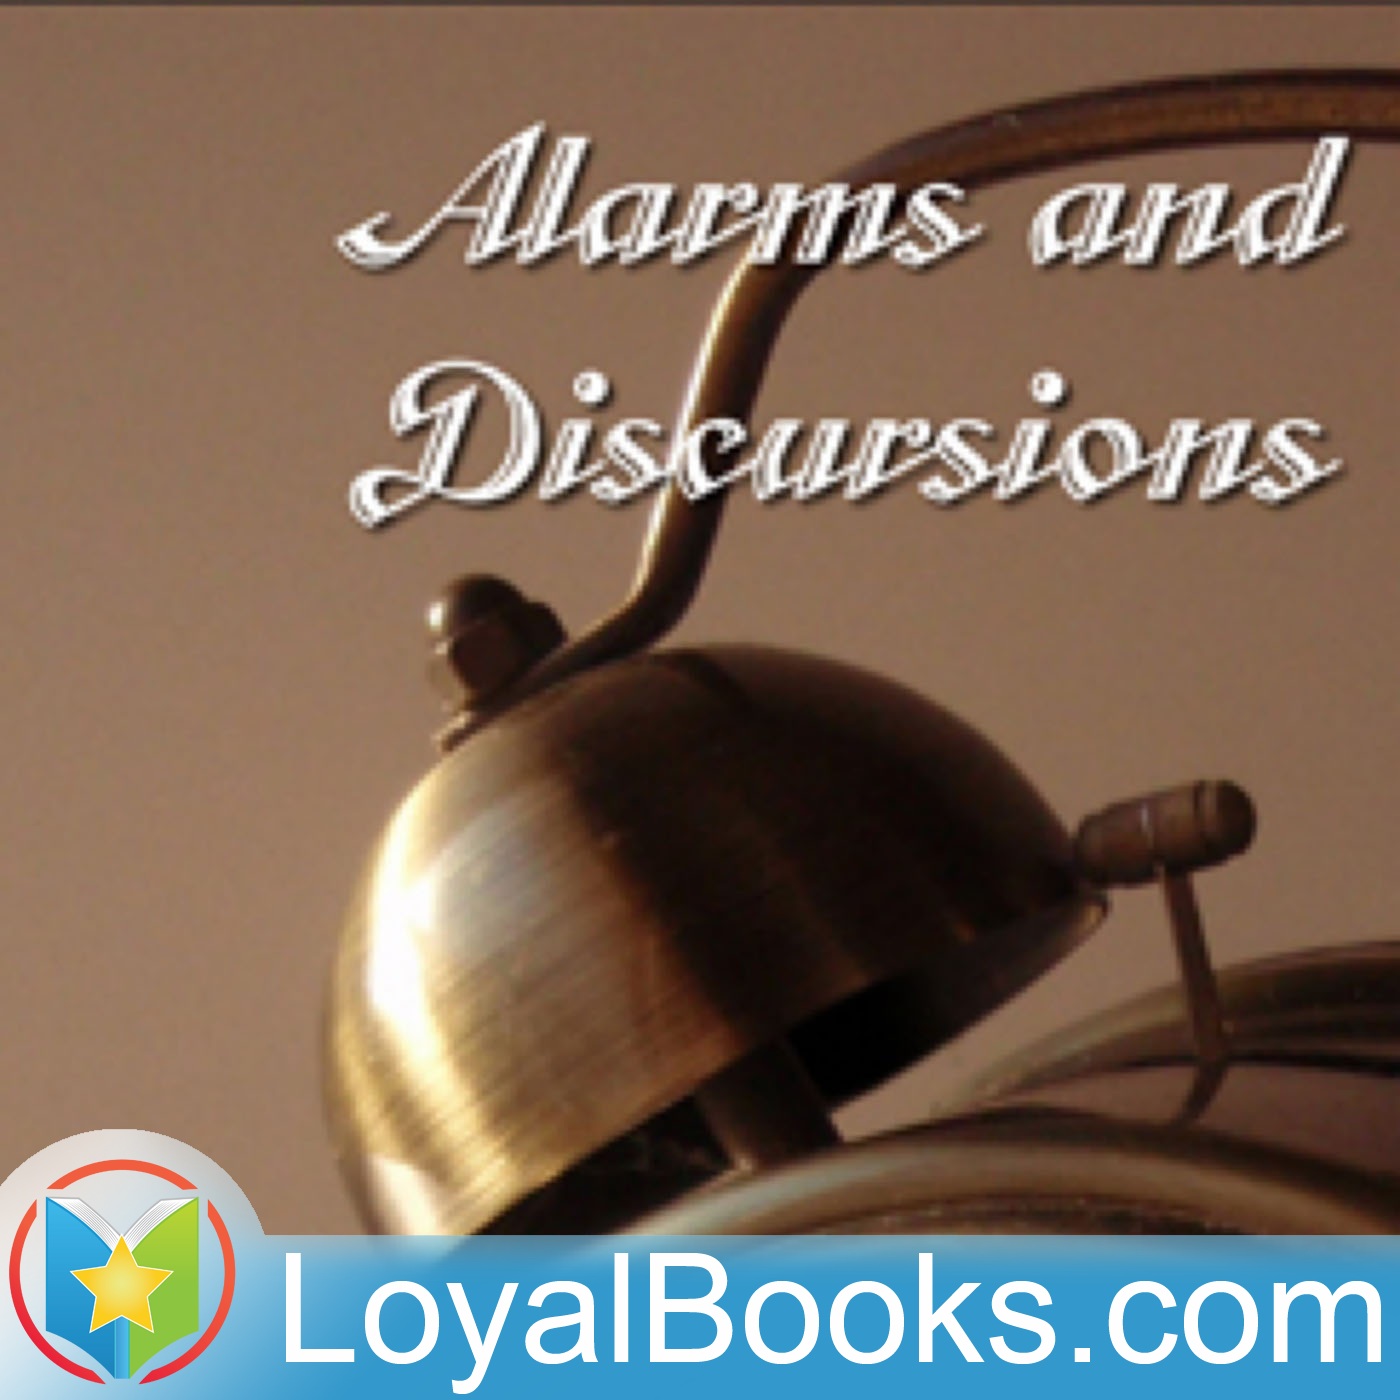 Alarms and Discursions by G. K. Chesterton